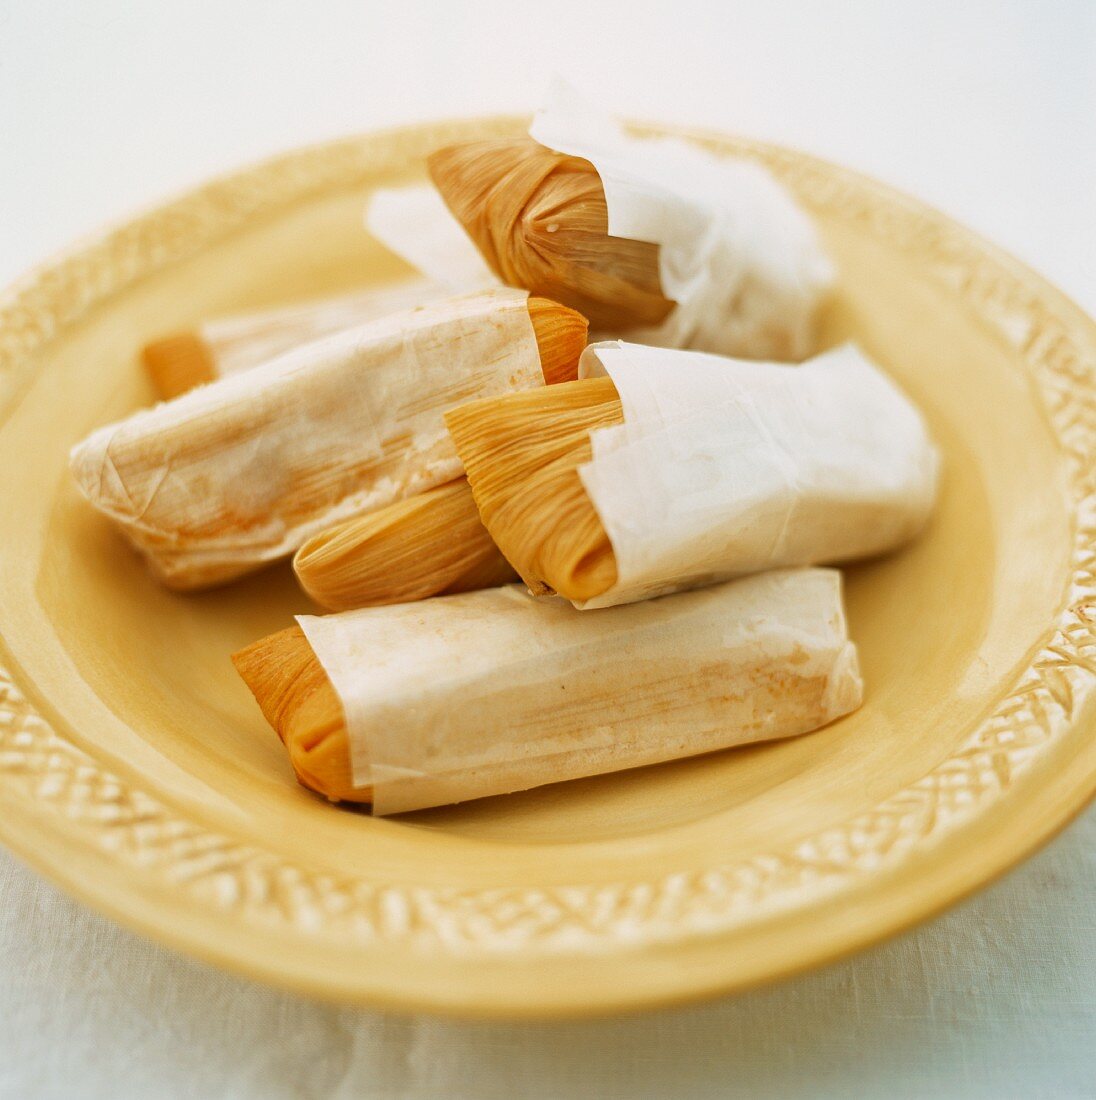 Tamales (stuffed maize leaves, popular in South America)